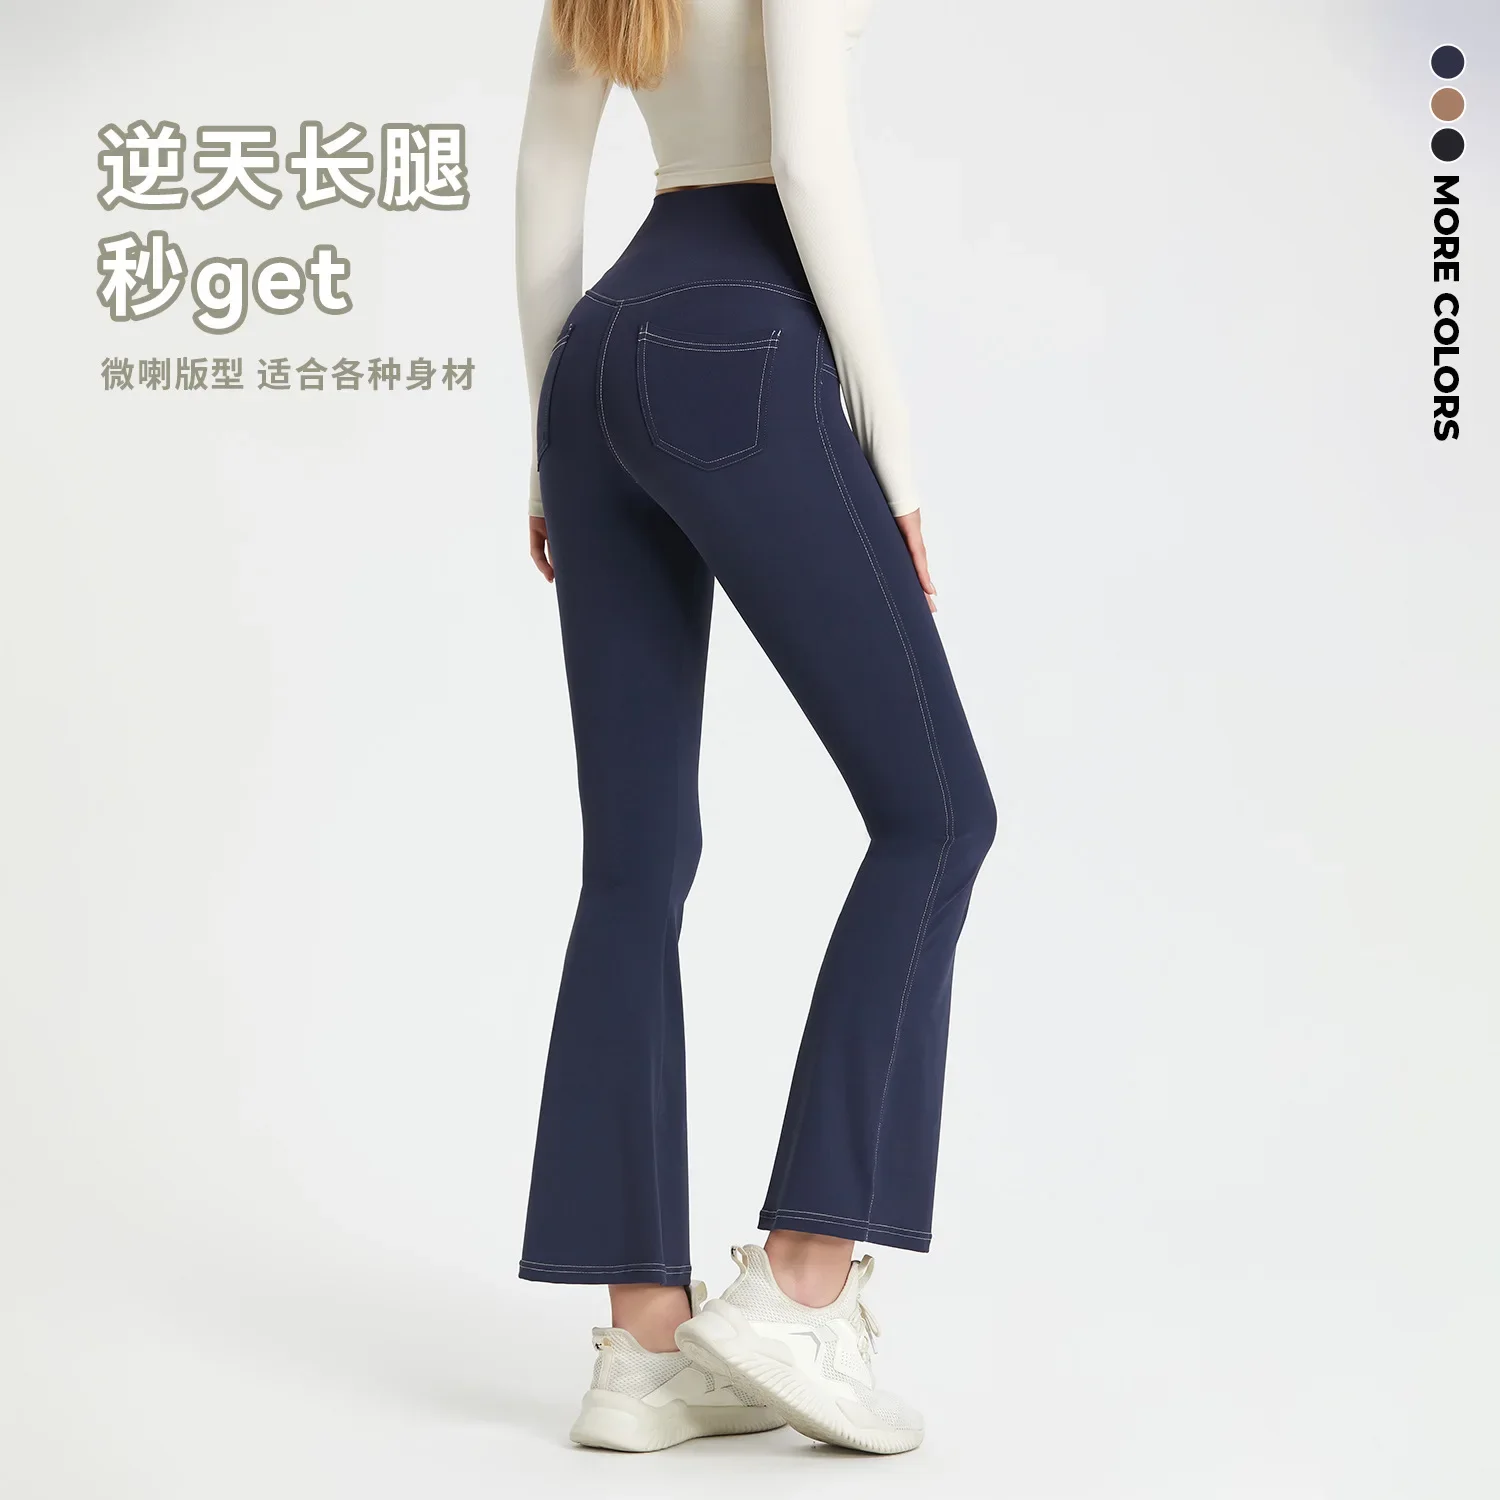 

QieLe High Waist Yoga Pants for Women Tights Hips Lifted Flared Trousers Jeans Routing Long Sport Pants